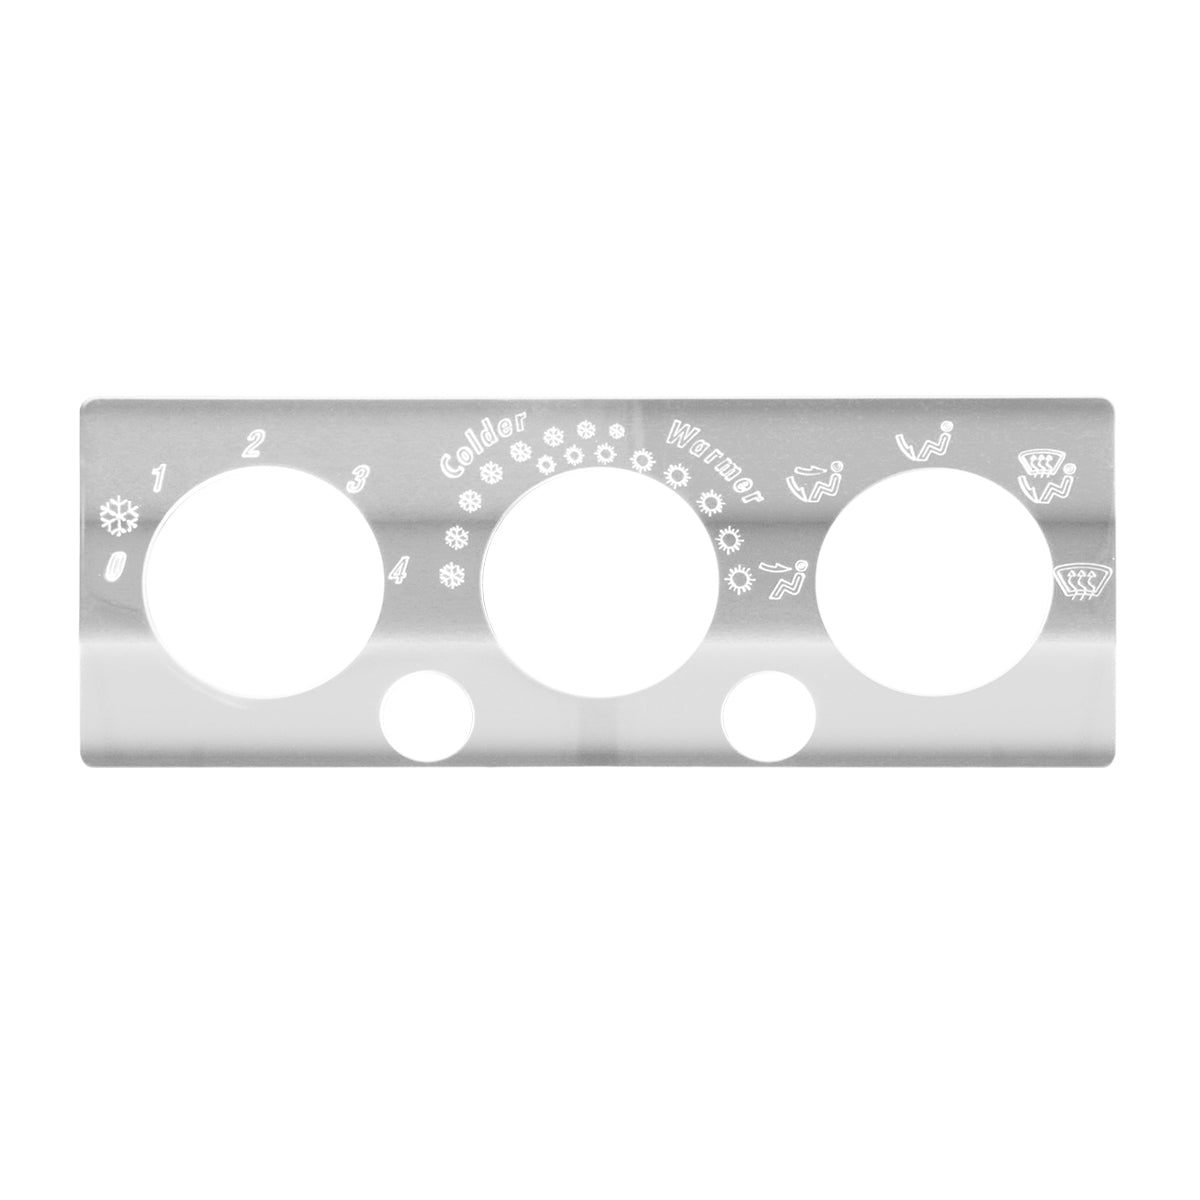 Stainless Steel 3 Switch AC/Heater Control Plate for International